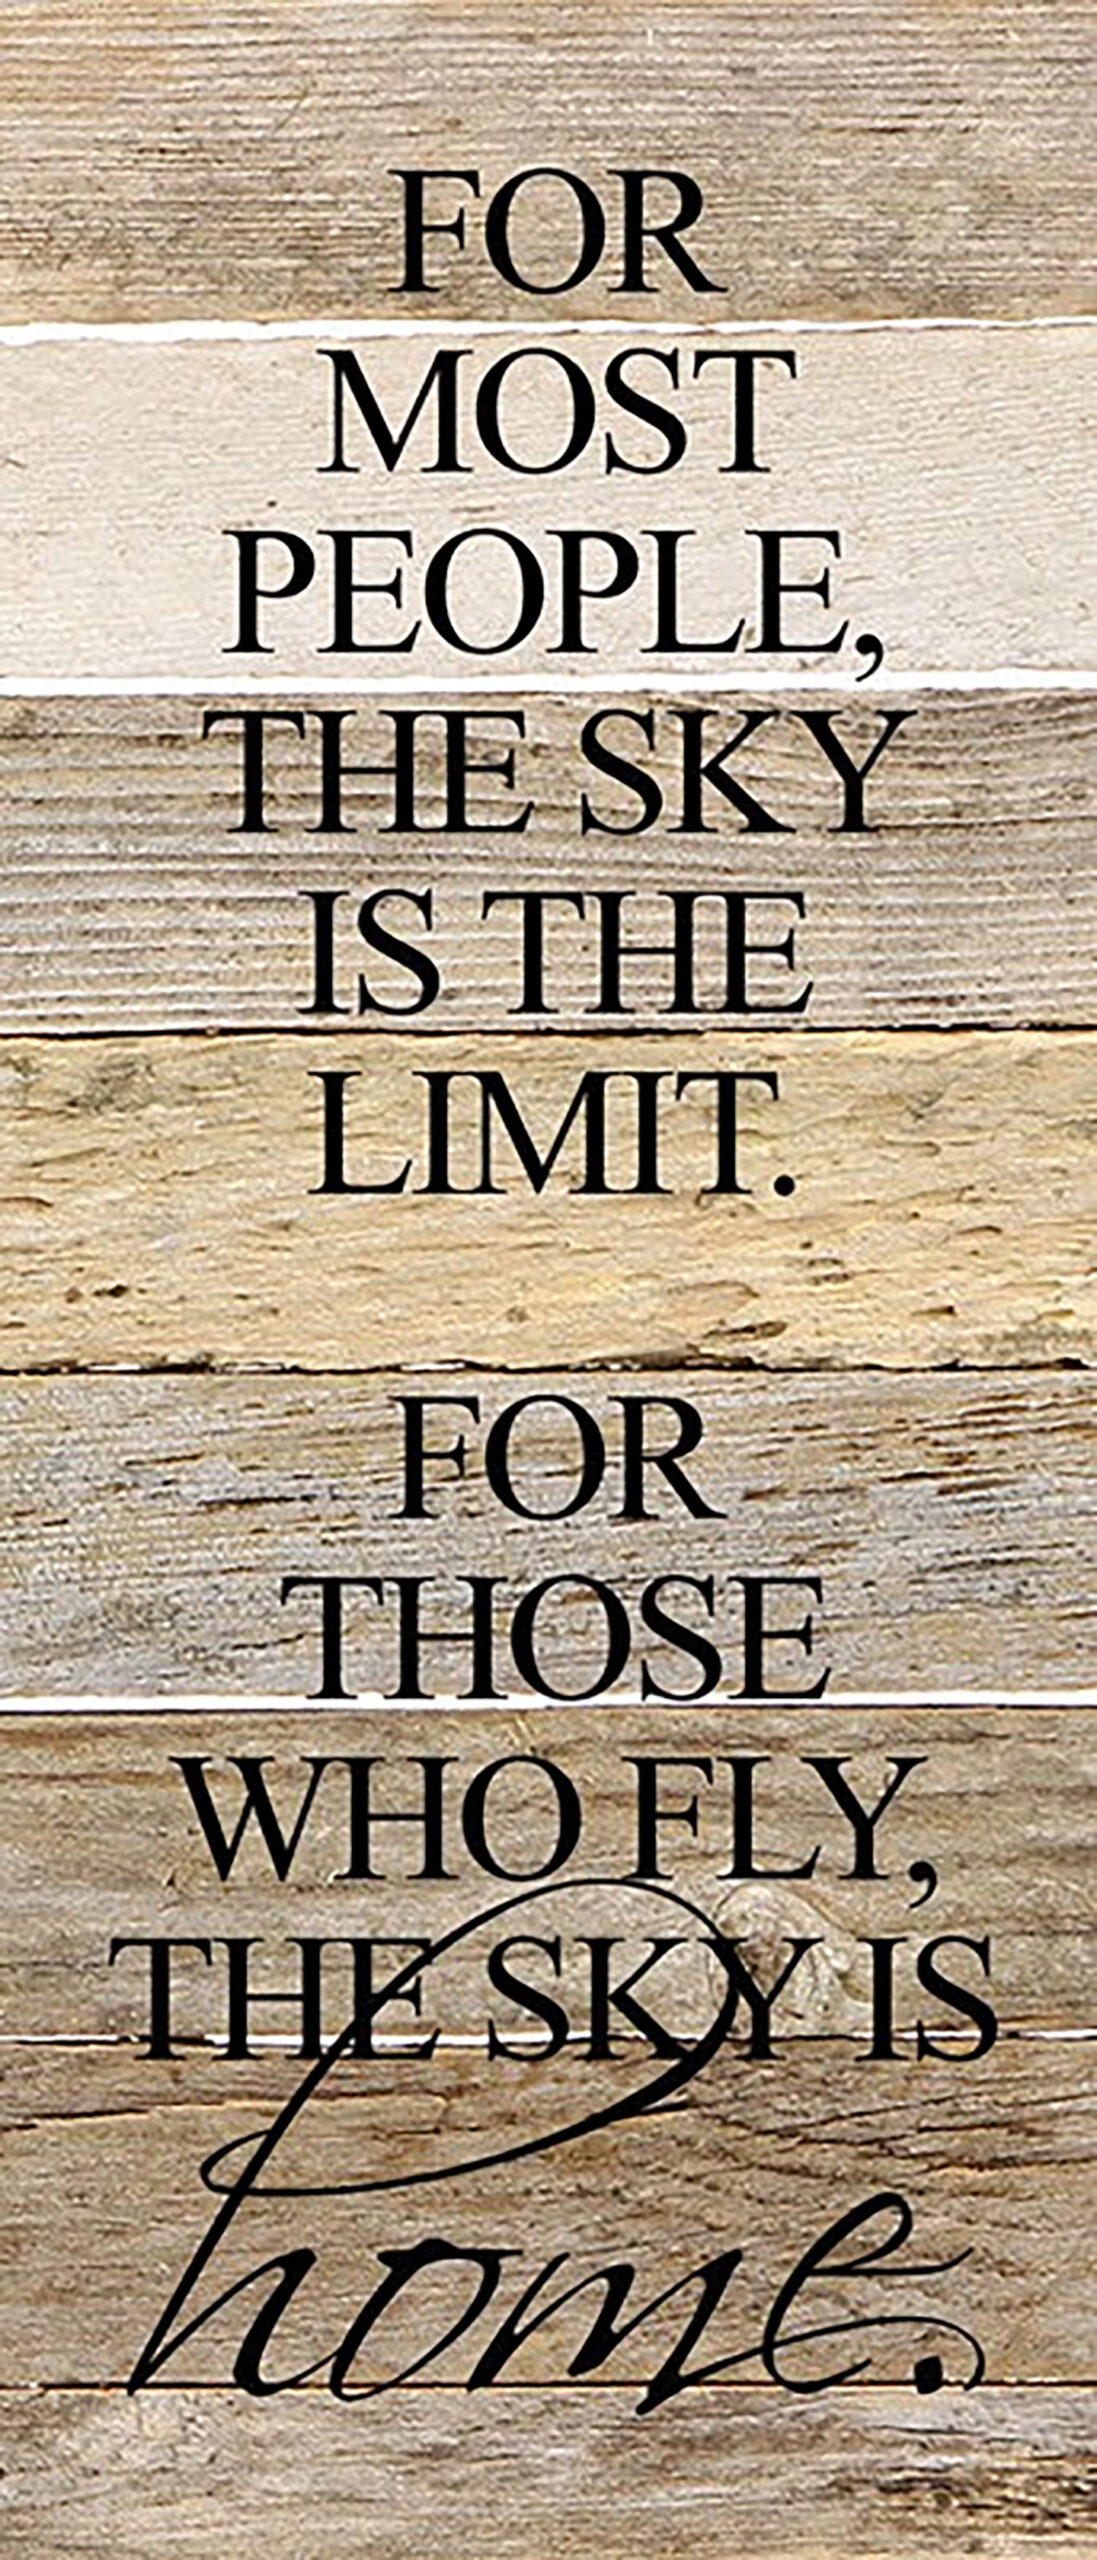 For most people, the sky is the limit. For those who fly, the sky is home. / 6"x14" Reclaimed Wood Sign